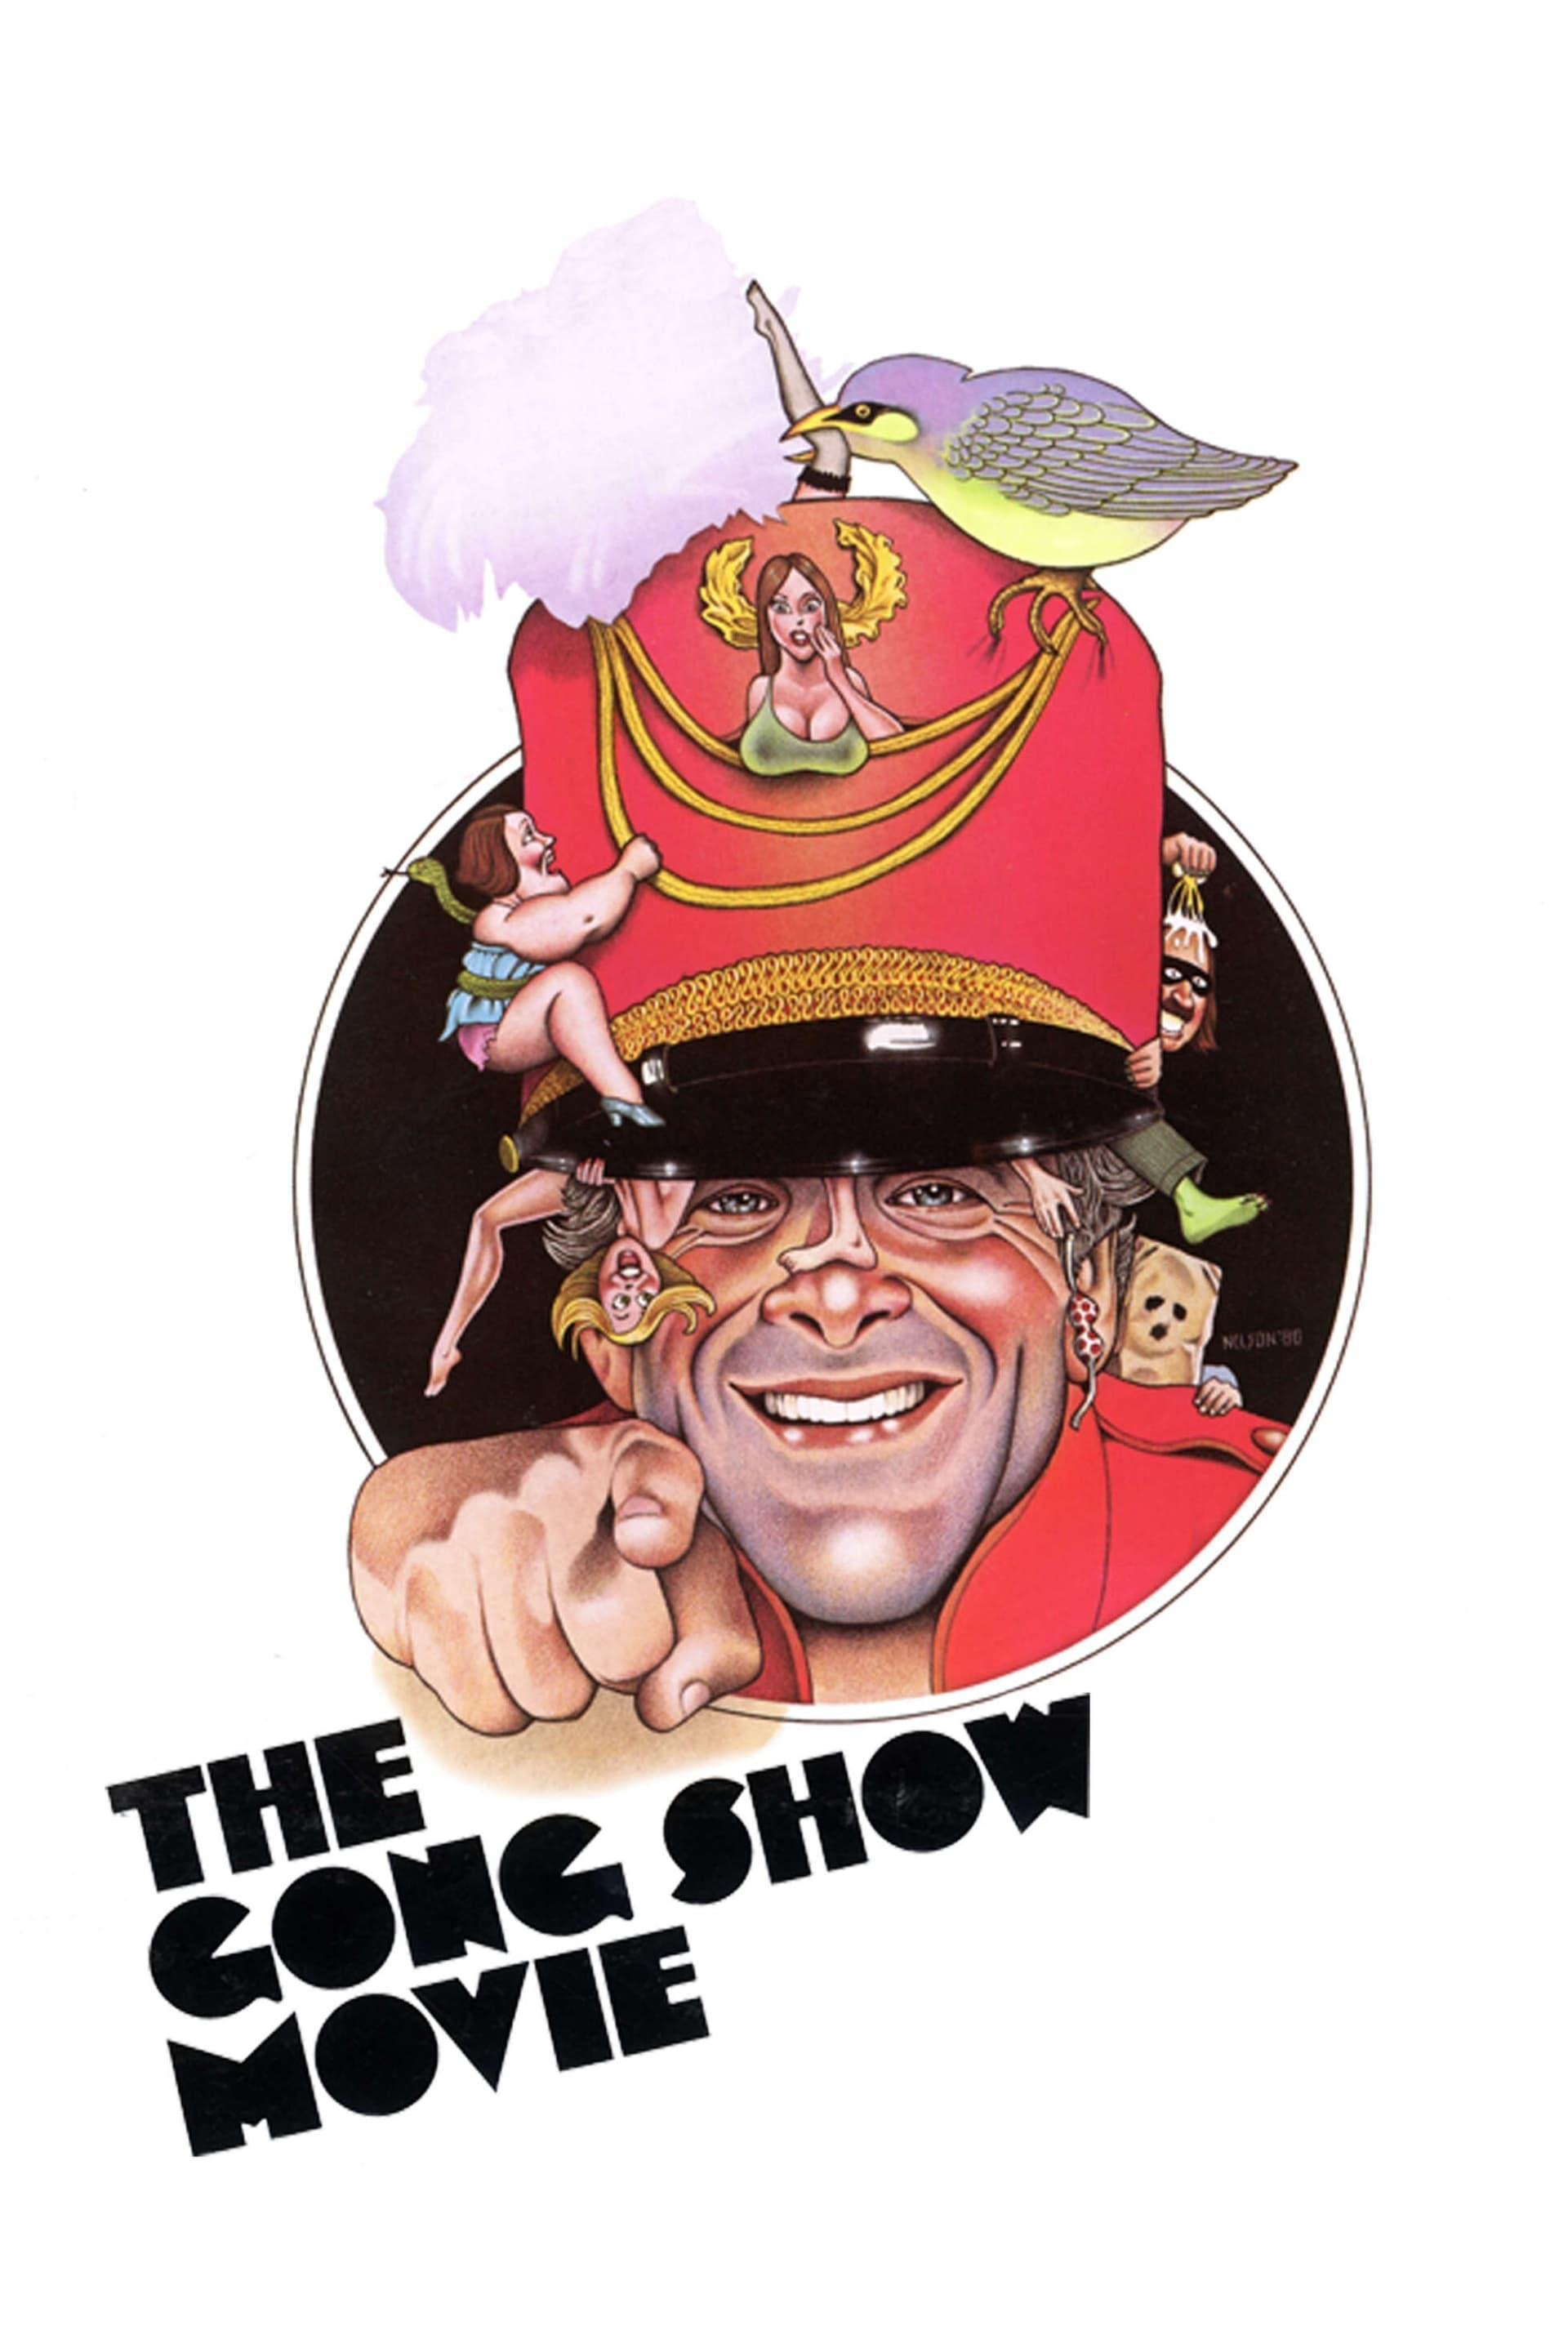 The Gong Show Movie poster